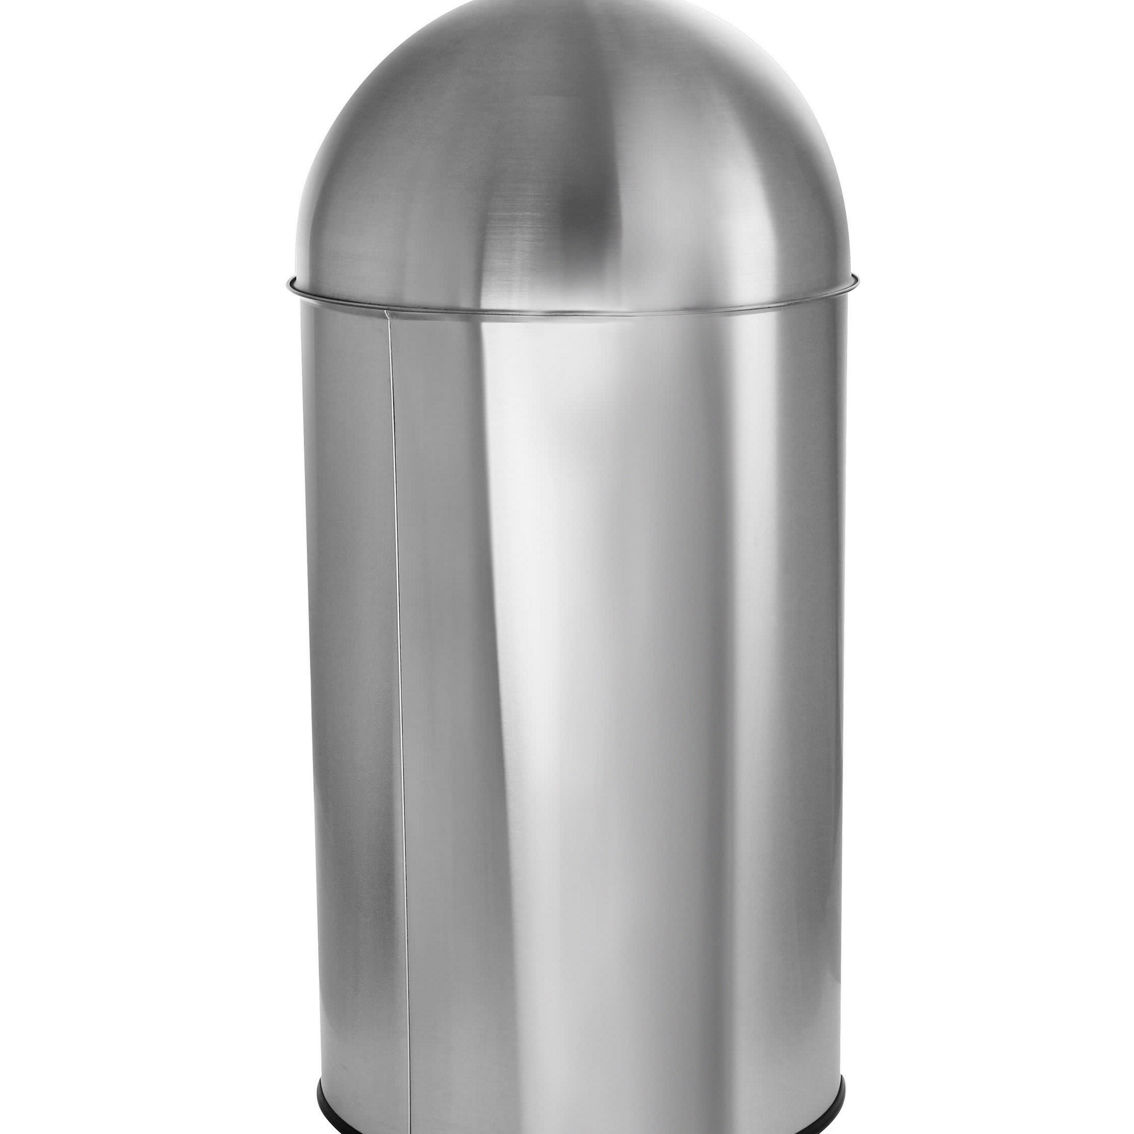 Elama 50 Liter Large 13 Gallon Push Lid Stainless Steel Cylindrical Home and Kit - Image 3 of 5